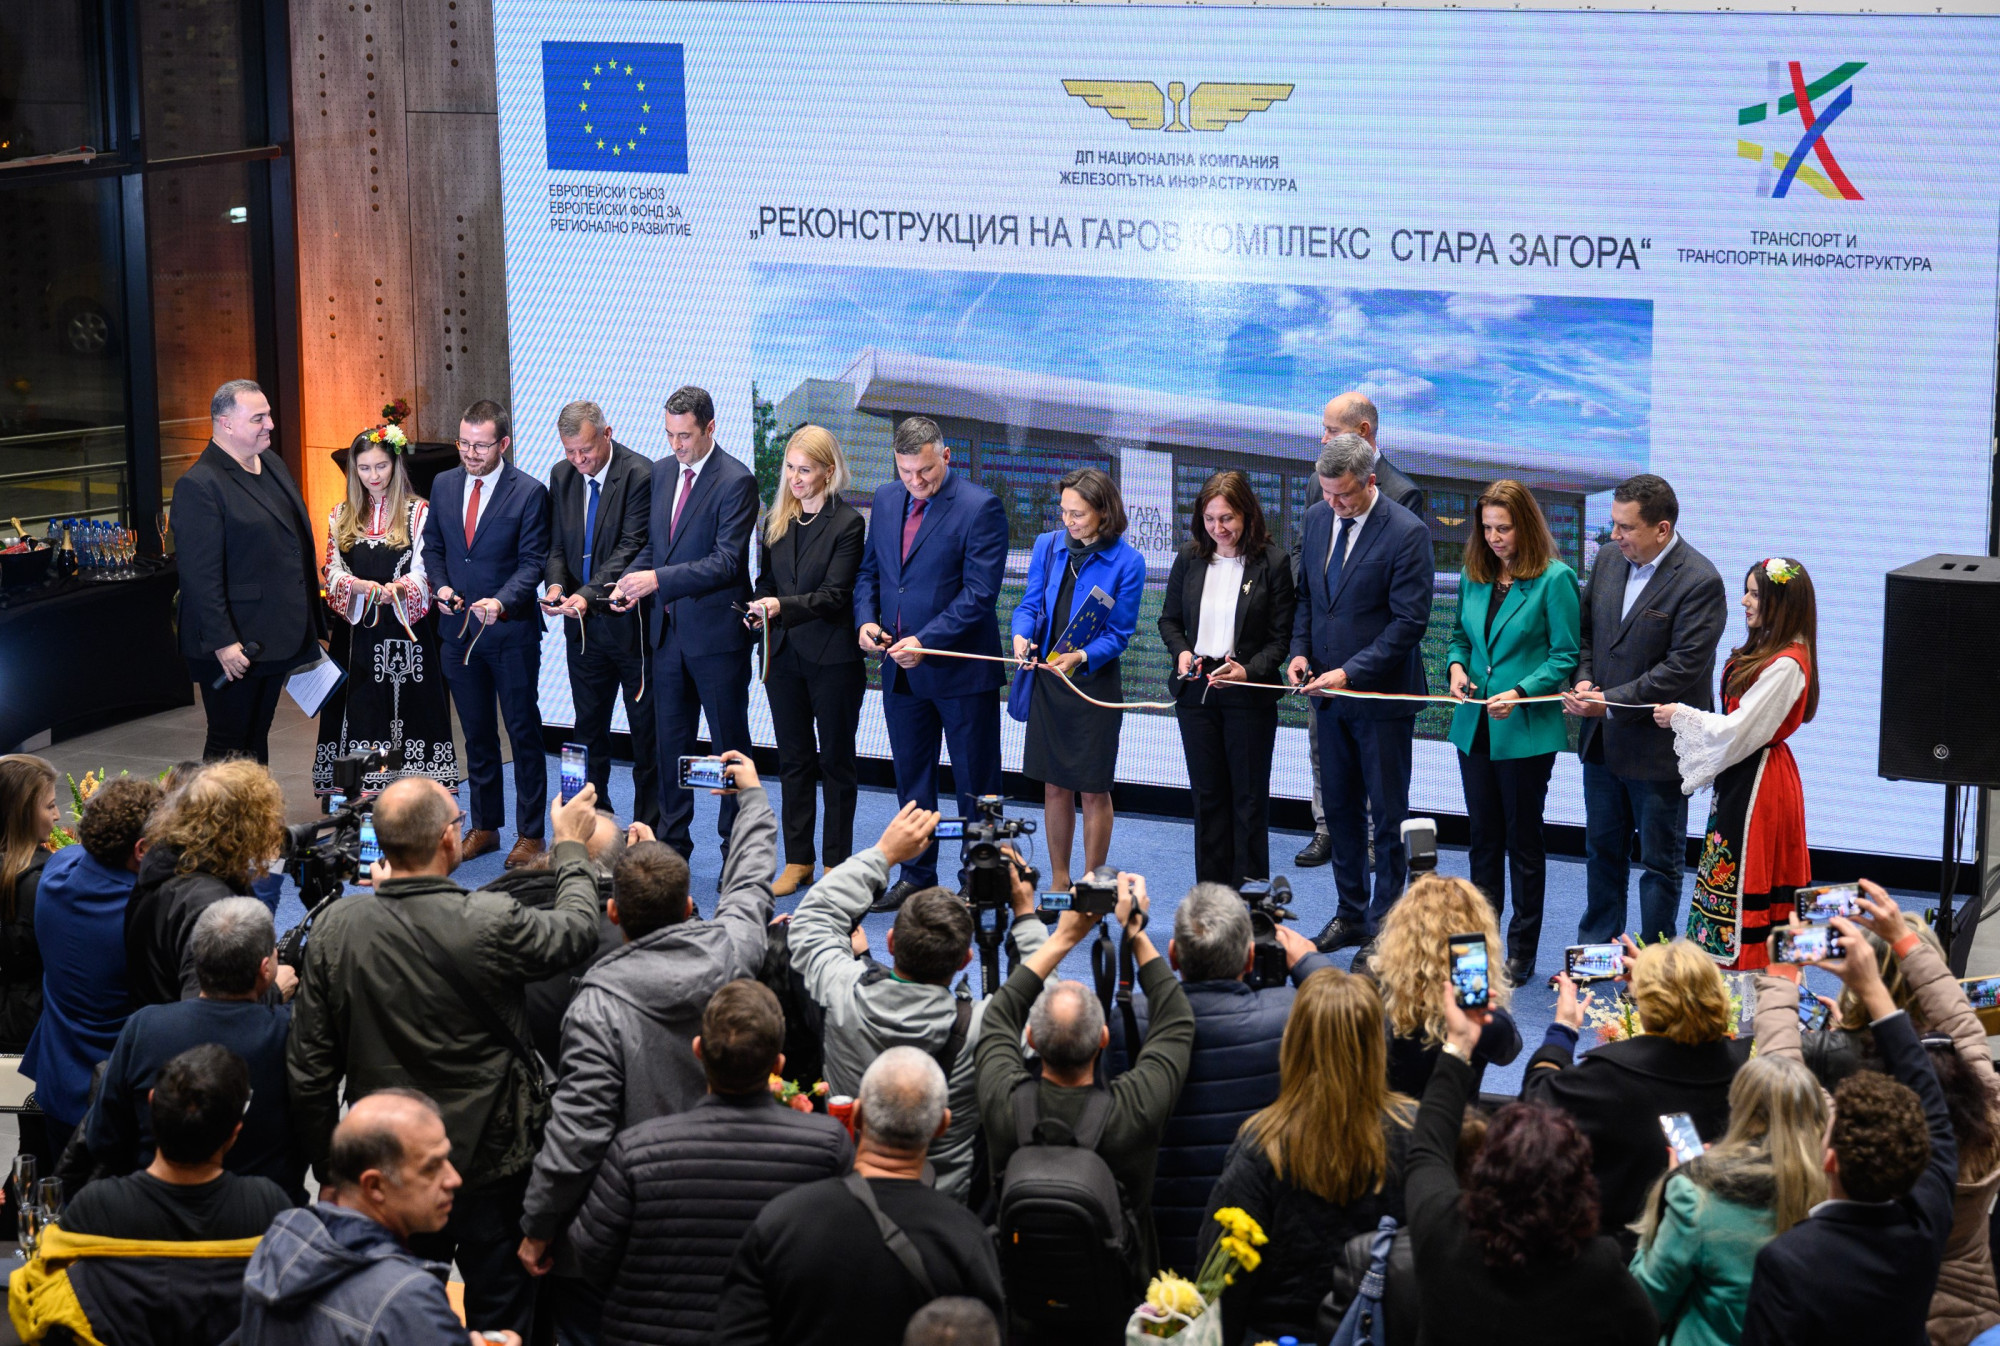 inauguration of EU-funded train station in Bulgaria